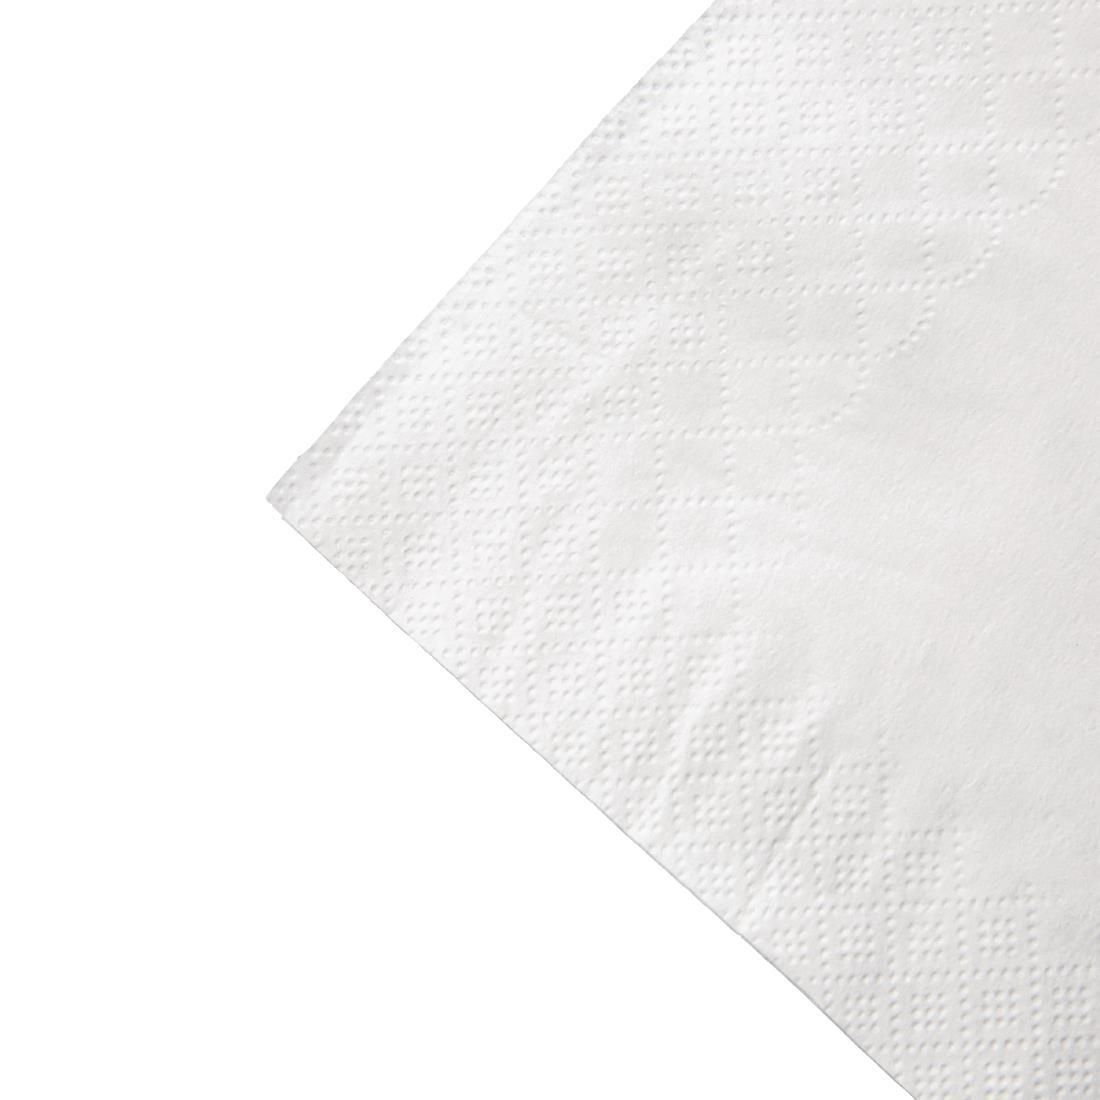 Fiesta Recyclable Lunch Napkin White 30x30cm 2ply 1/4 Fold (Pack of 250) - CM563  - 5